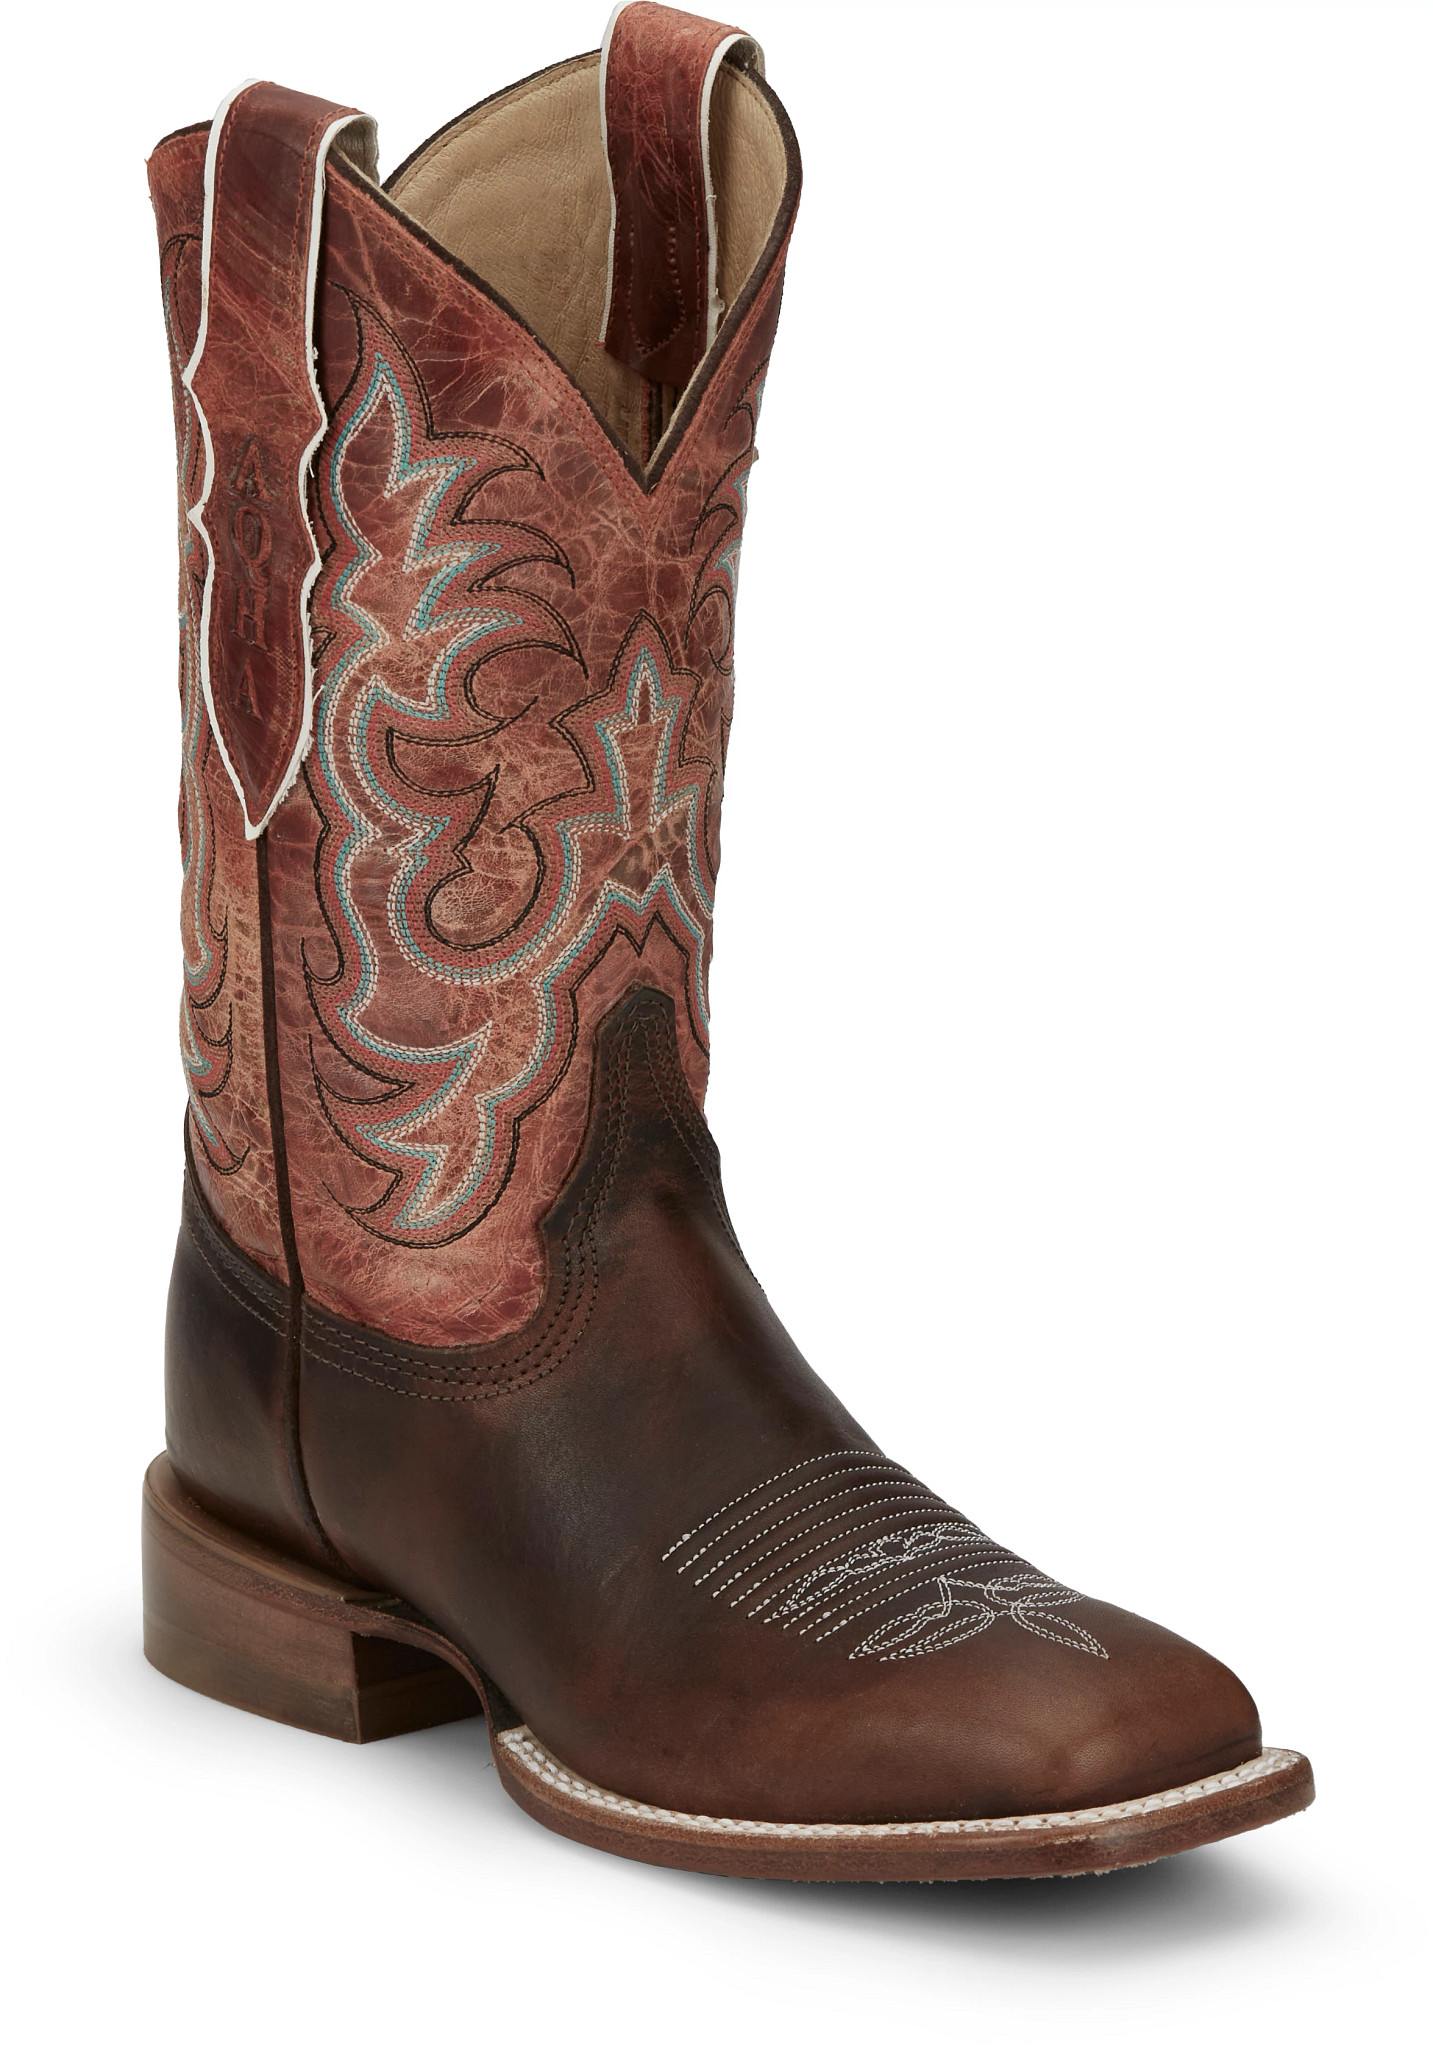 Authentic Cowgirl Boots for Women | Justin Boots